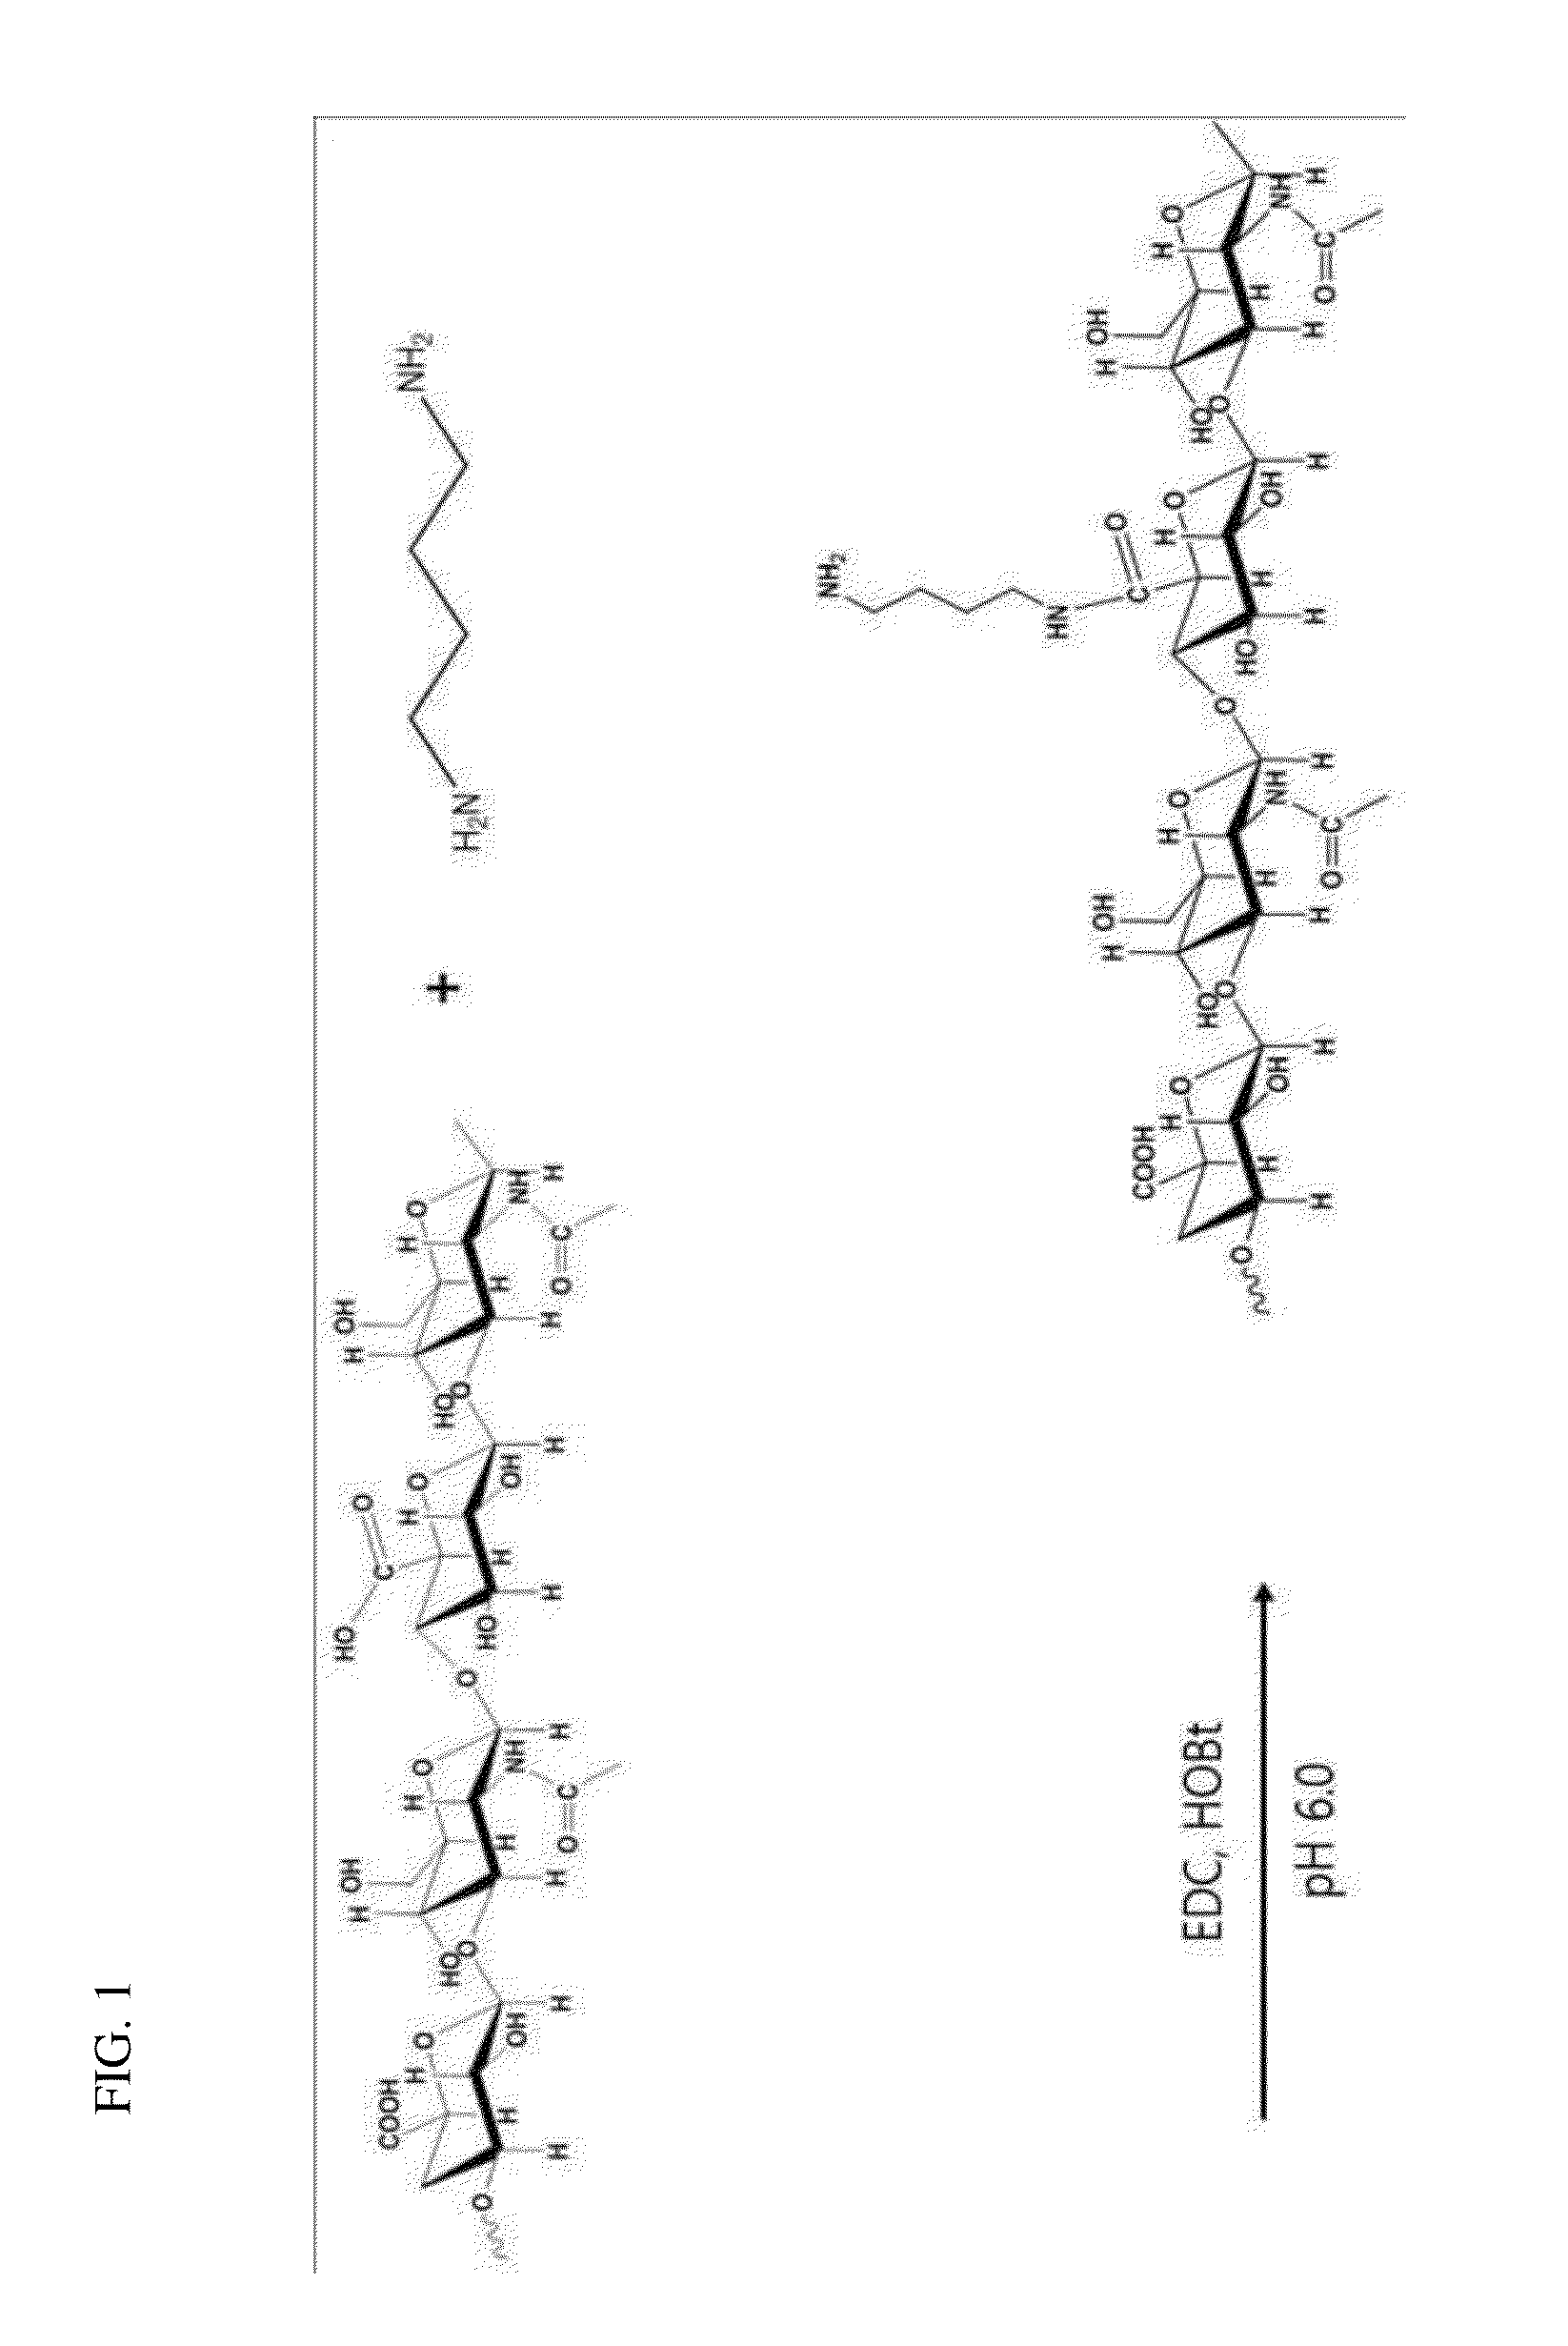 Hyaluronic acid-nucleic acid conjugate and composition for nucleic acid delivery containing the same